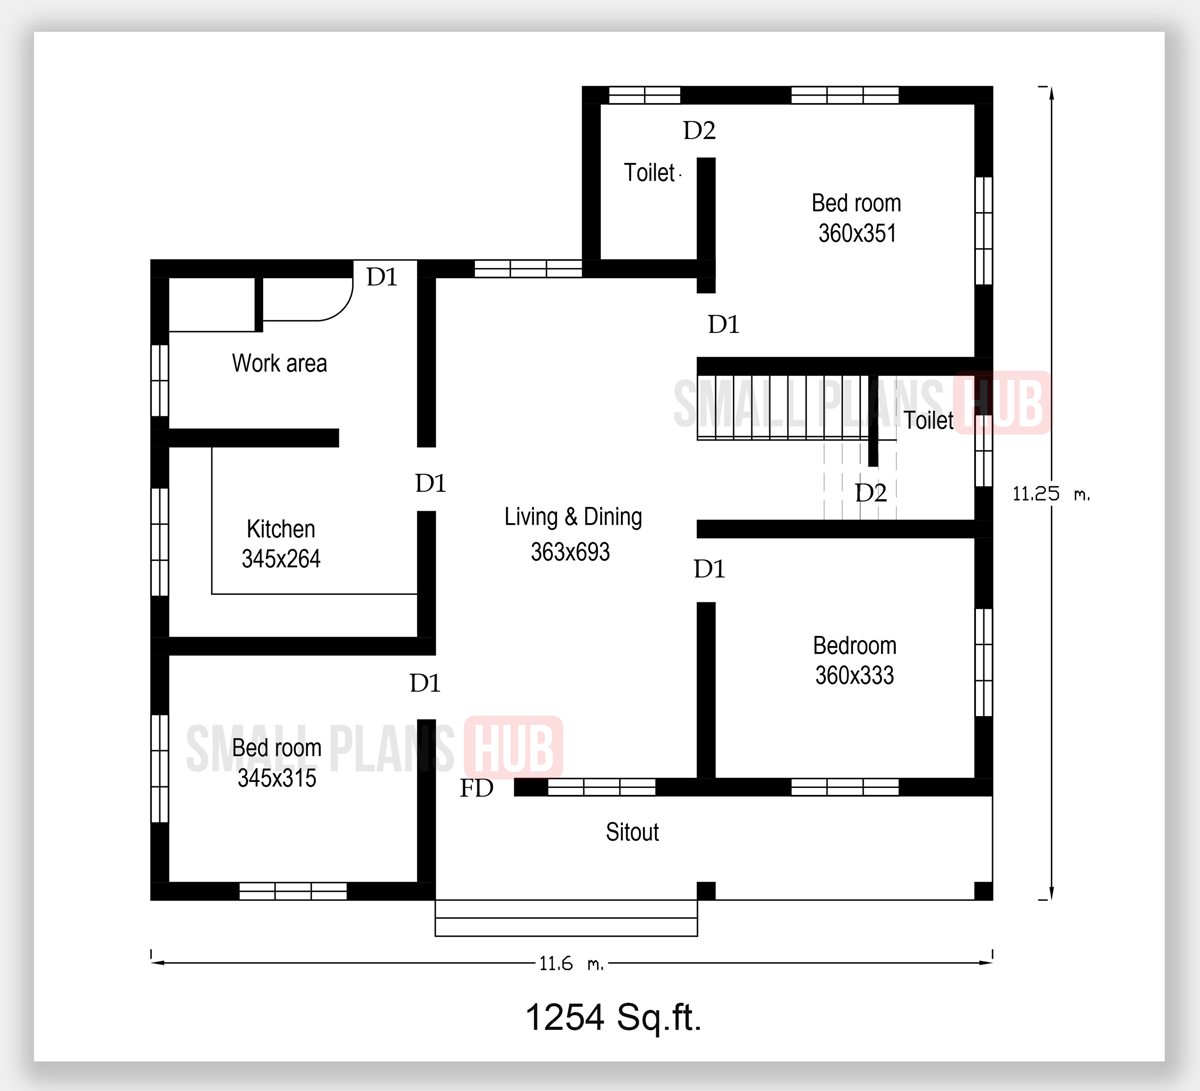 Three Kerala Style Small House Plans Under 1250 Sq.ft